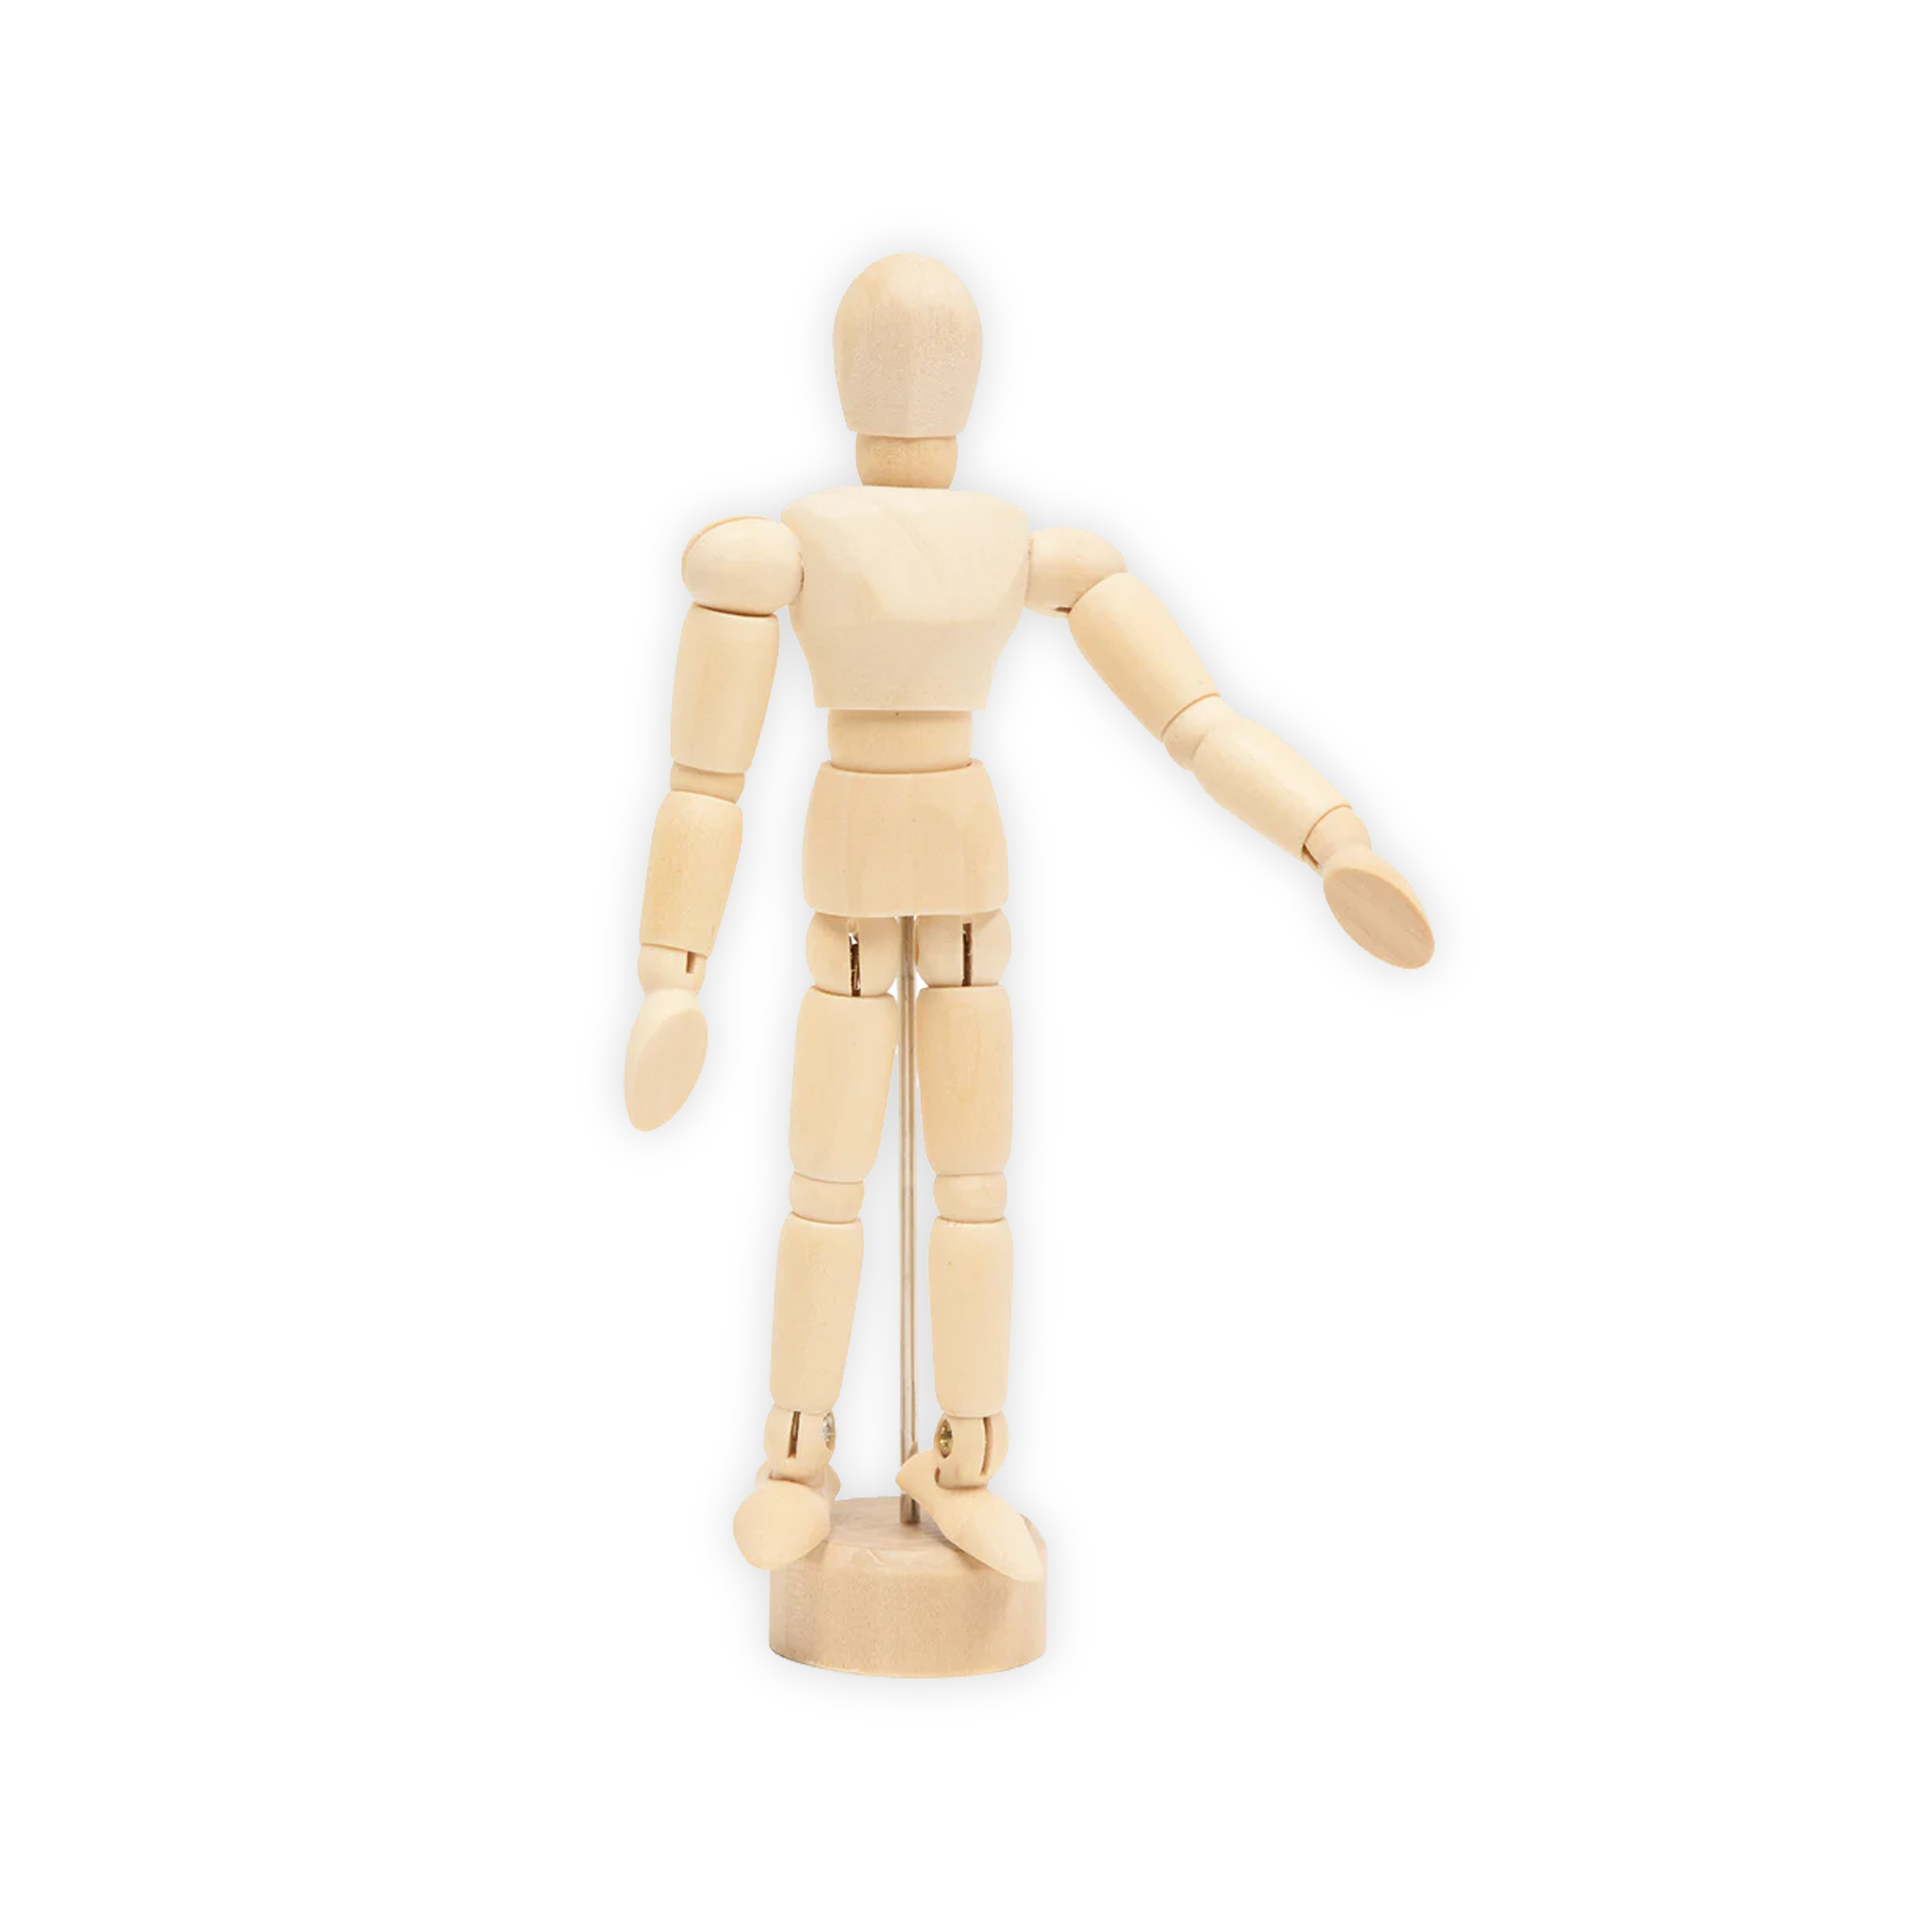 A wooden manikin with poseable joints.